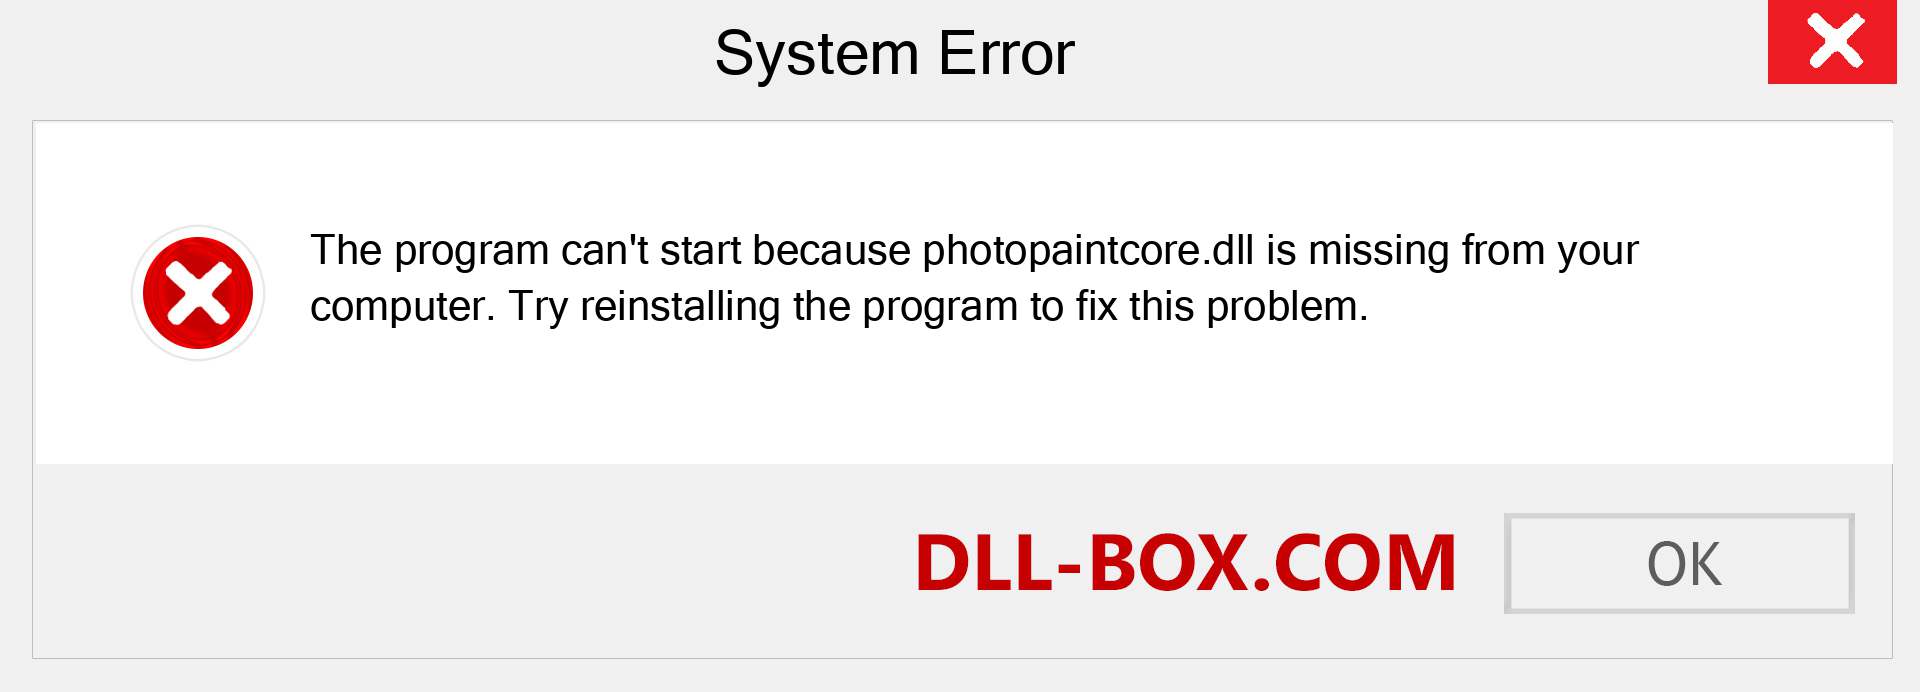  photopaintcore.dll file is missing?. Download for Windows 7, 8, 10 - Fix  photopaintcore dll Missing Error on Windows, photos, images